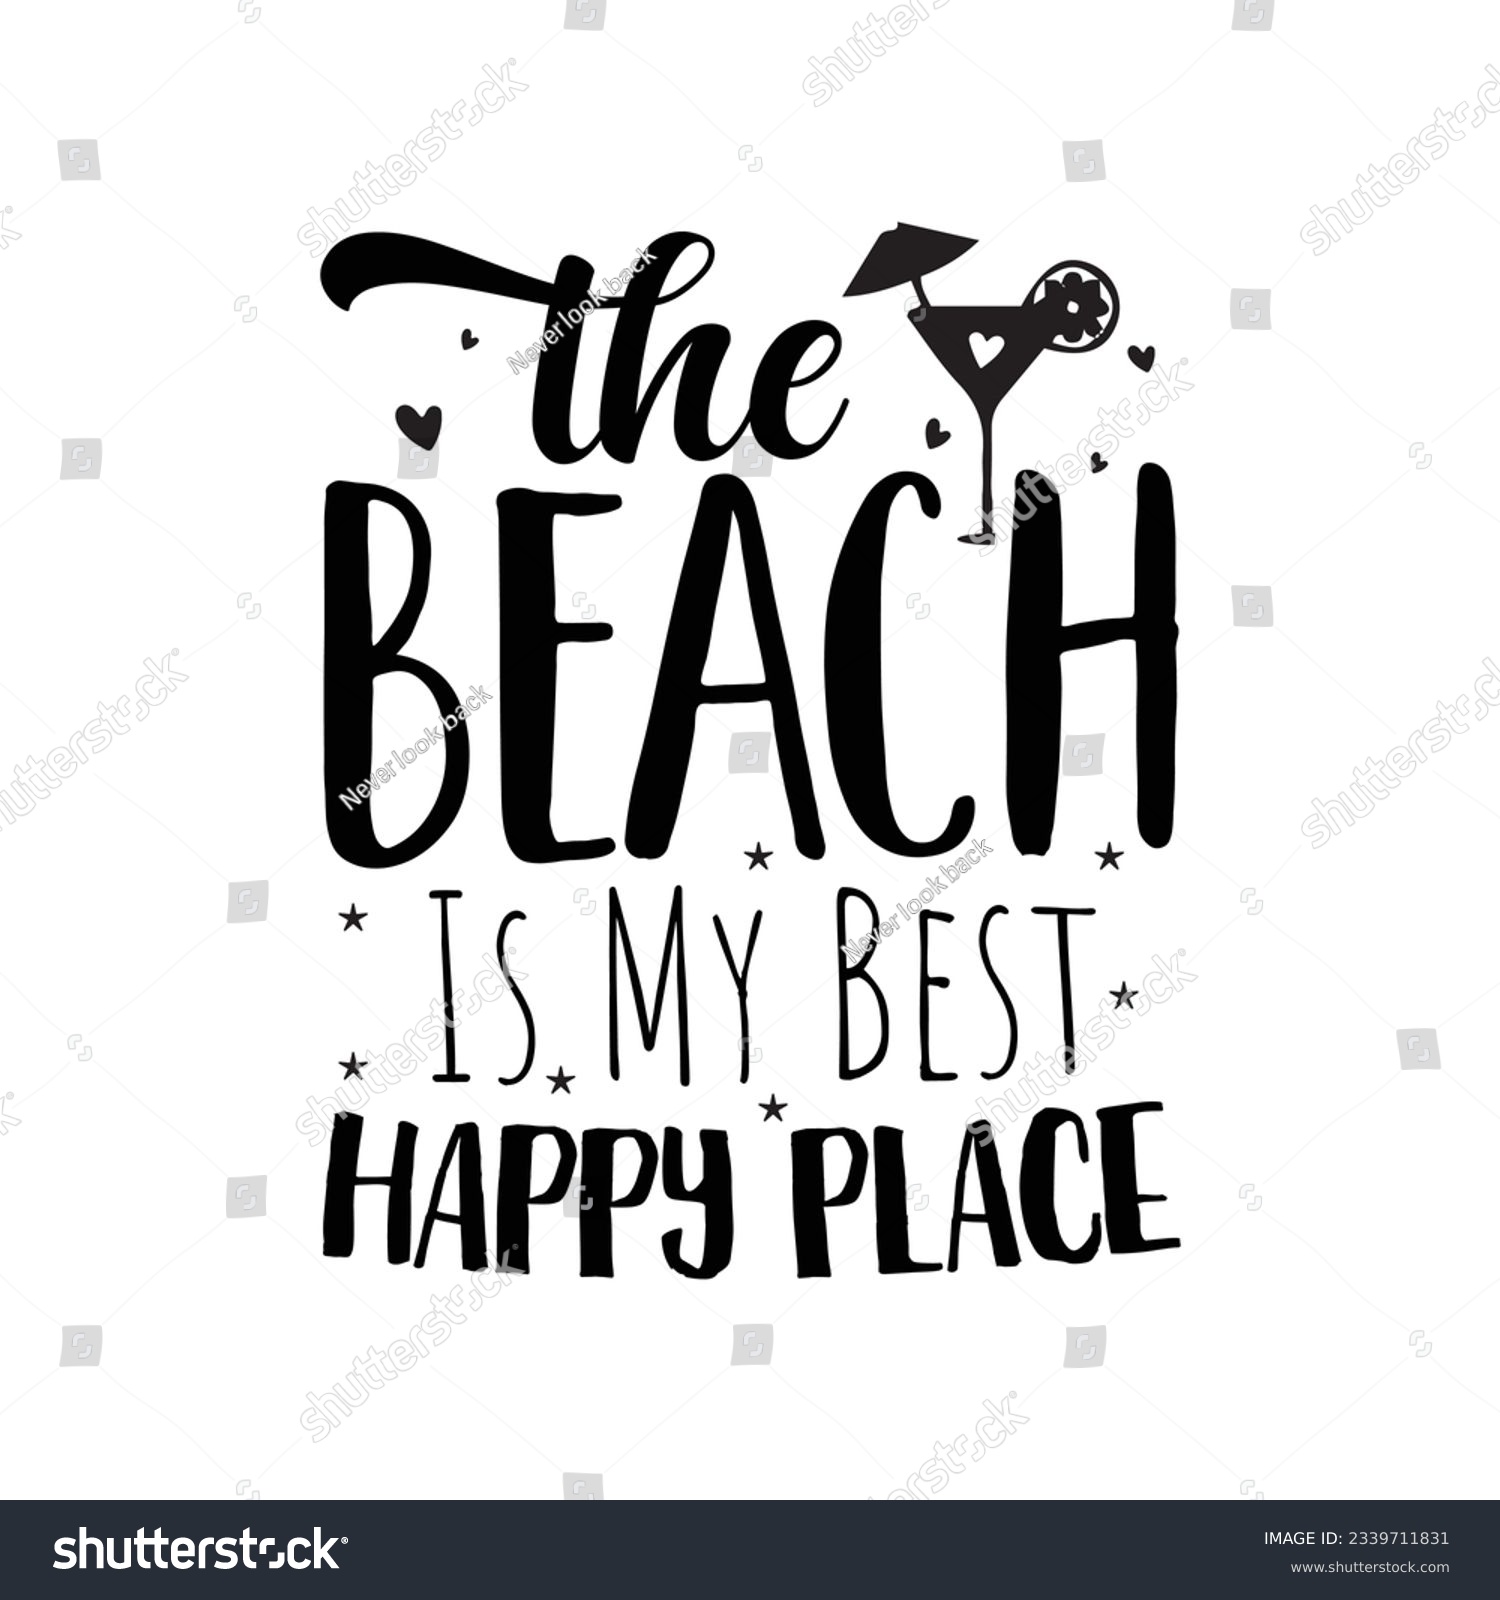 SVG of  the  beach is my best happy place SVG t-shirt design, summer SVG, summer quotes , waves SVG, beach, summer time  SVG, Hand drawn vintage illustration with lettering and decoration elements
 svg